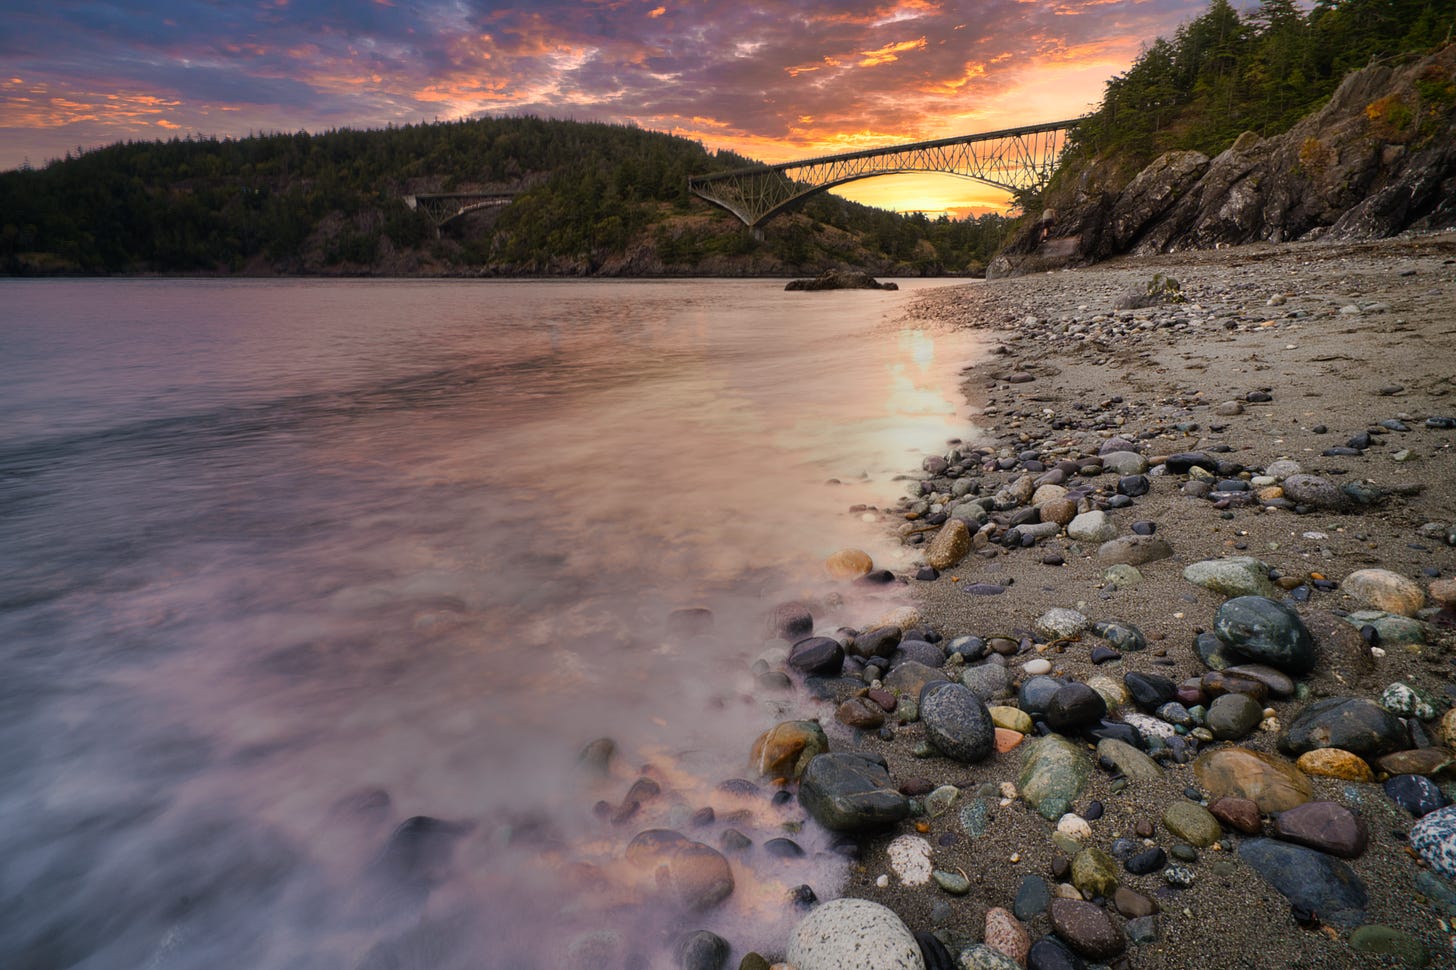 A beach at sunset, with sand and rocks at right and water at left, looking toward the Deception Pass Bridge in Washington state.